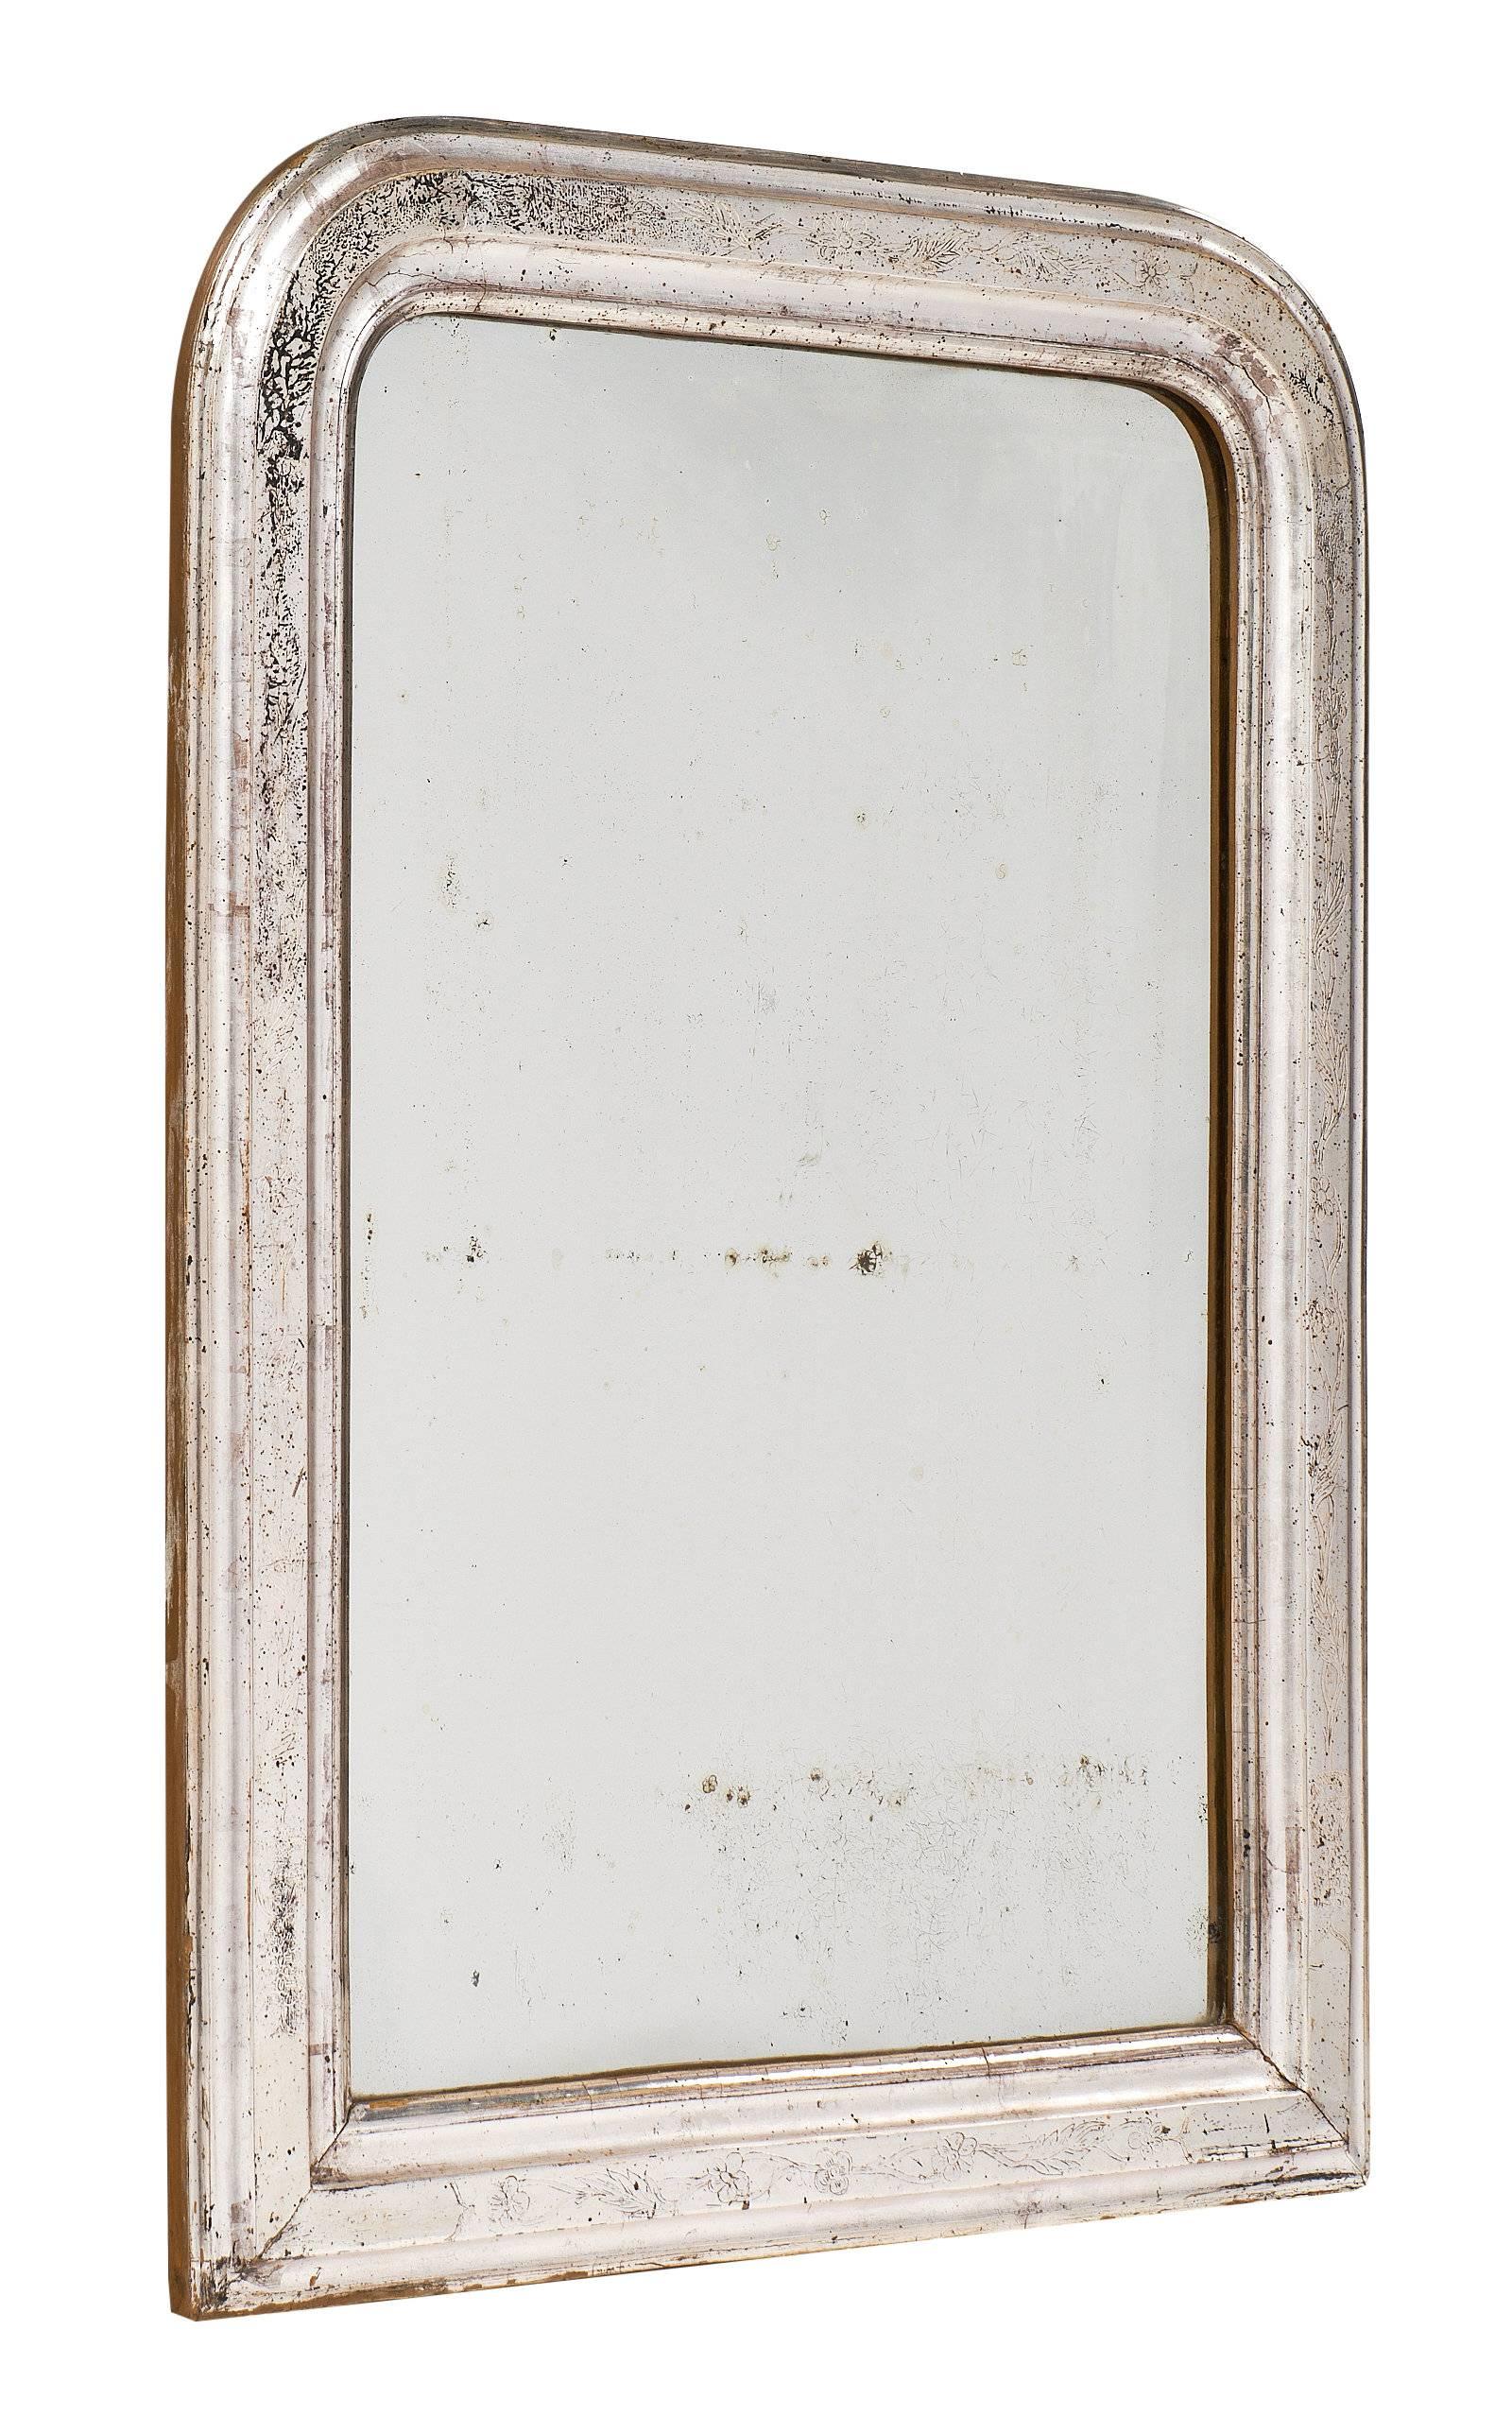 Lovely Louis Philippe mirror with original antique mirror and silver leafed frame. The classic curved upper corners showcase the history of this piece, circa 1845. There is an etched pattern of floral details on the beautiful silver leafed mirror.